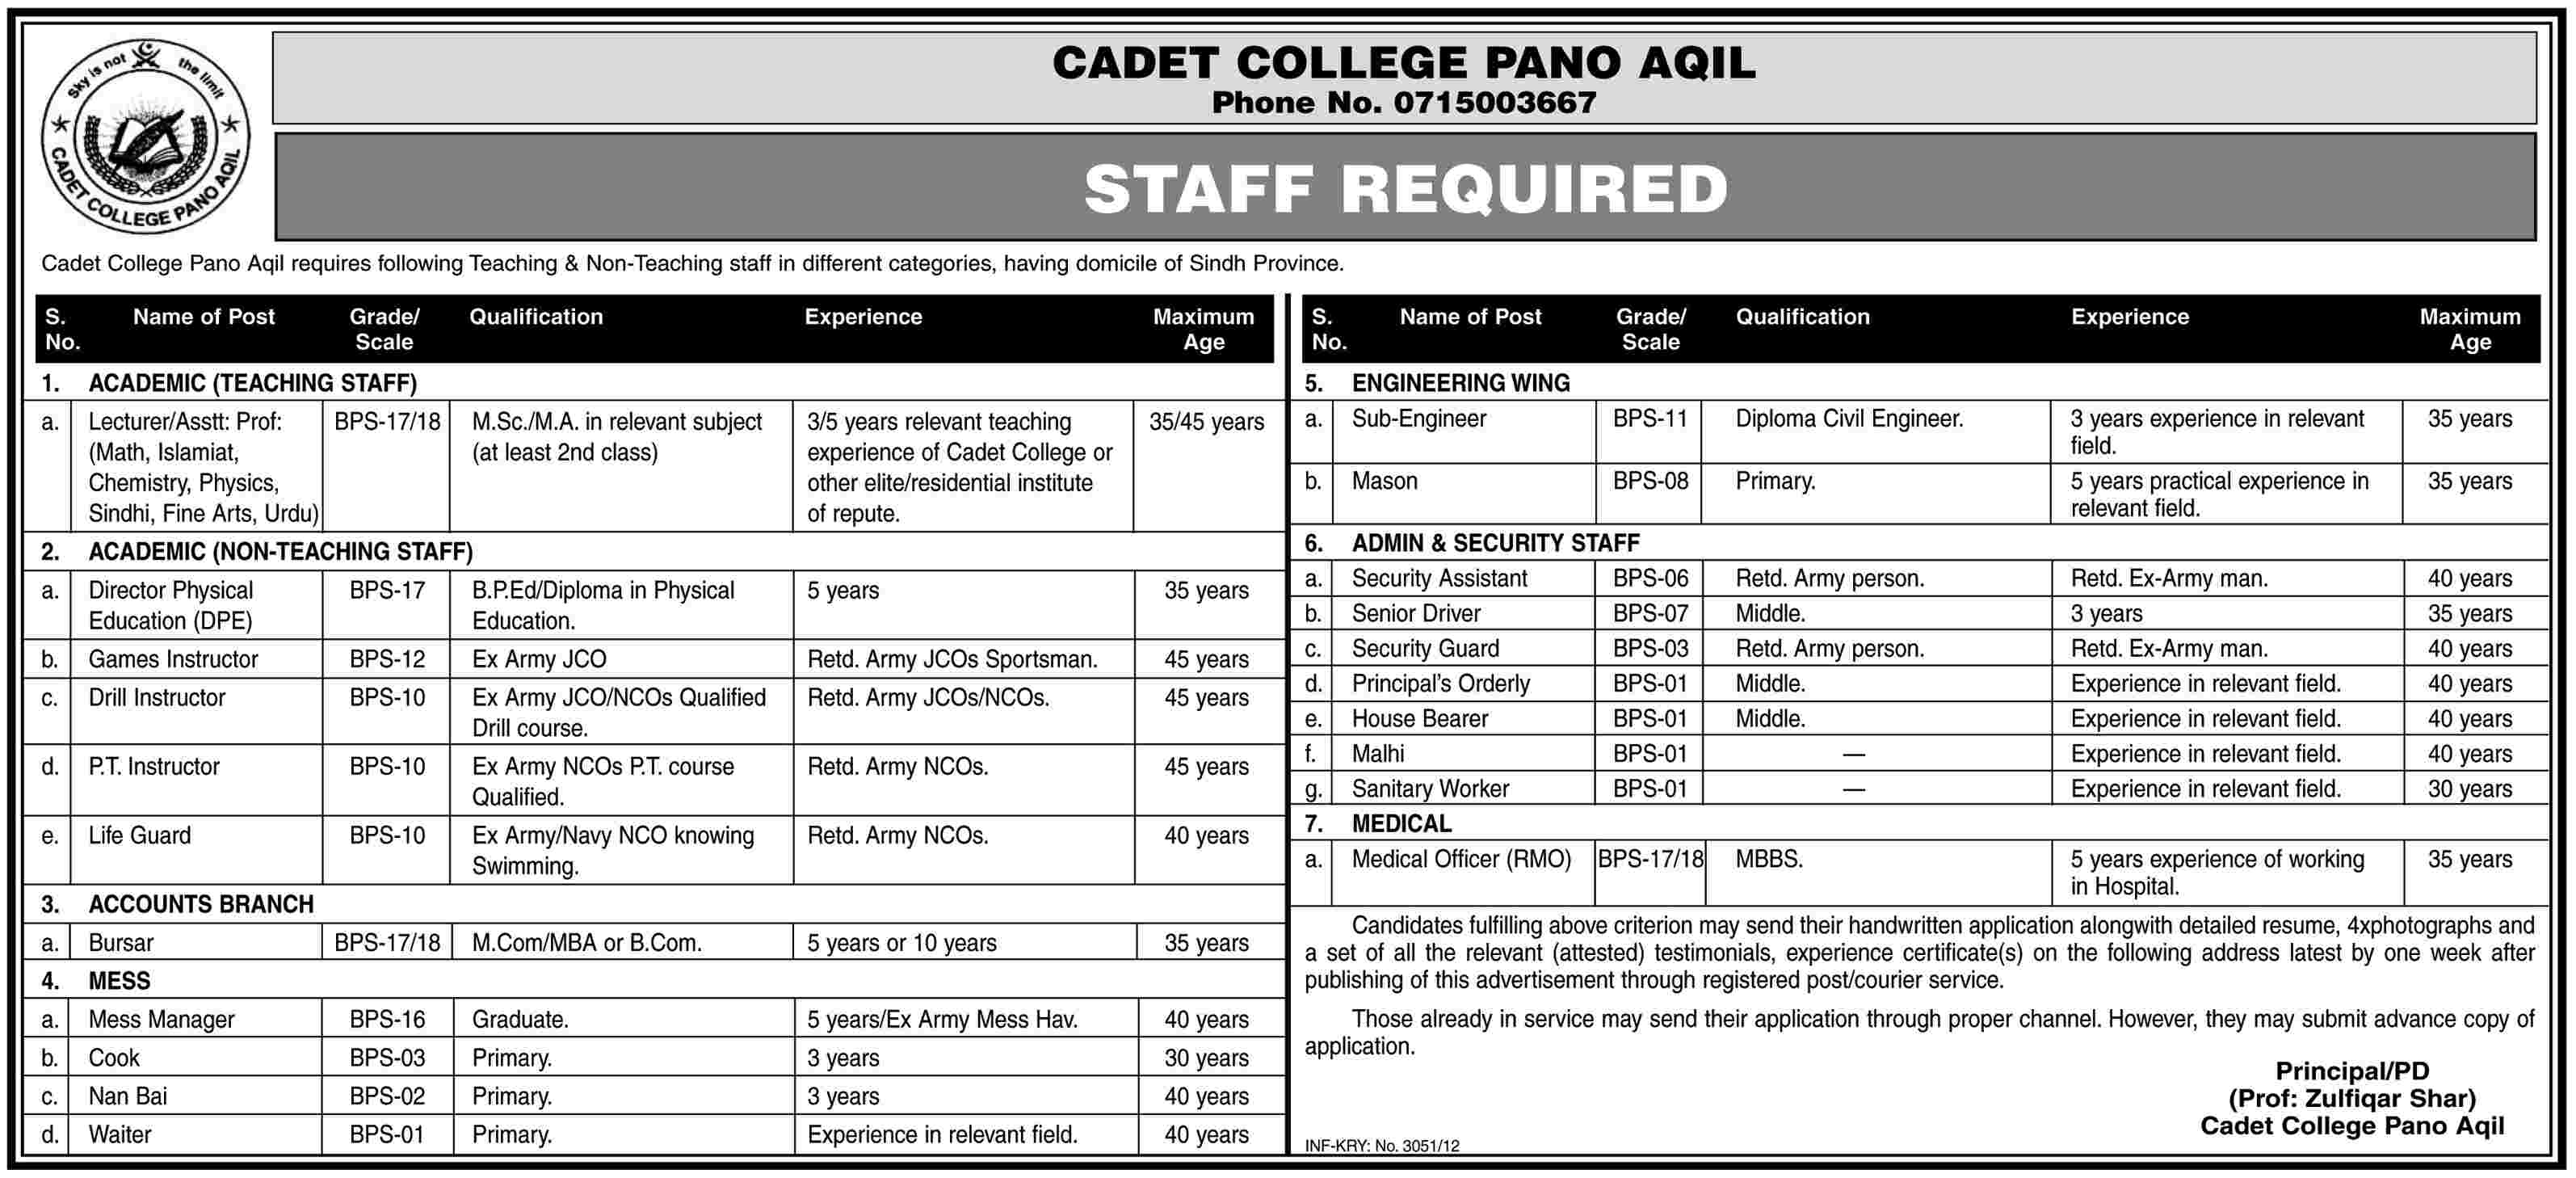 Cadet College Pano Aqil Requires Teaching and Non-Teaching Staff